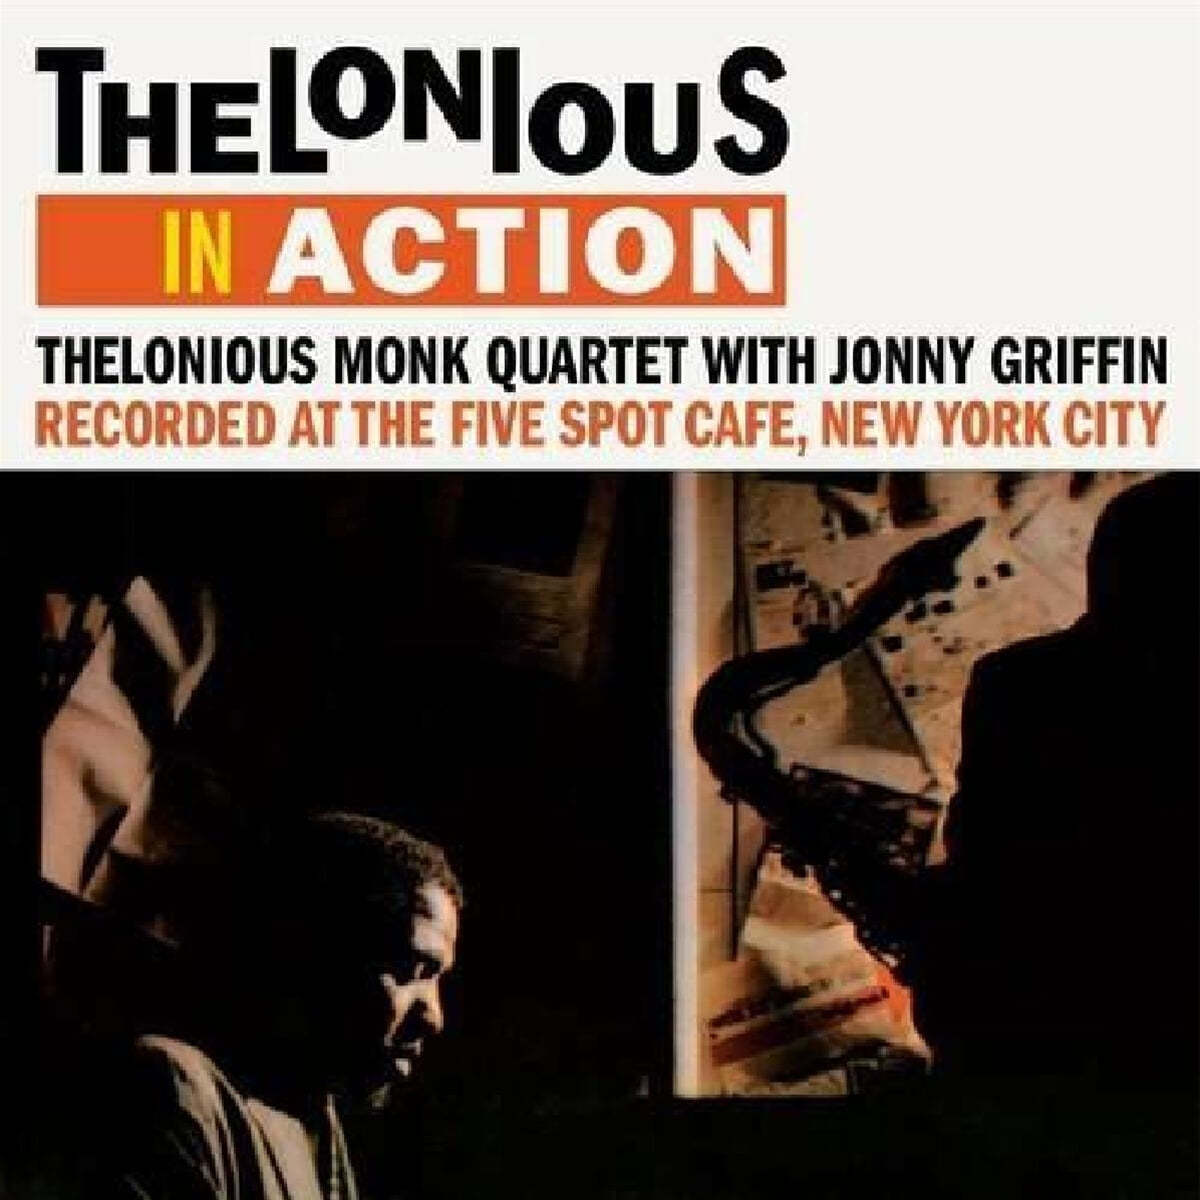 Thelonious Monk (델로니어스 몽크) - Thelonious In Action [투명 컬러 LP] 